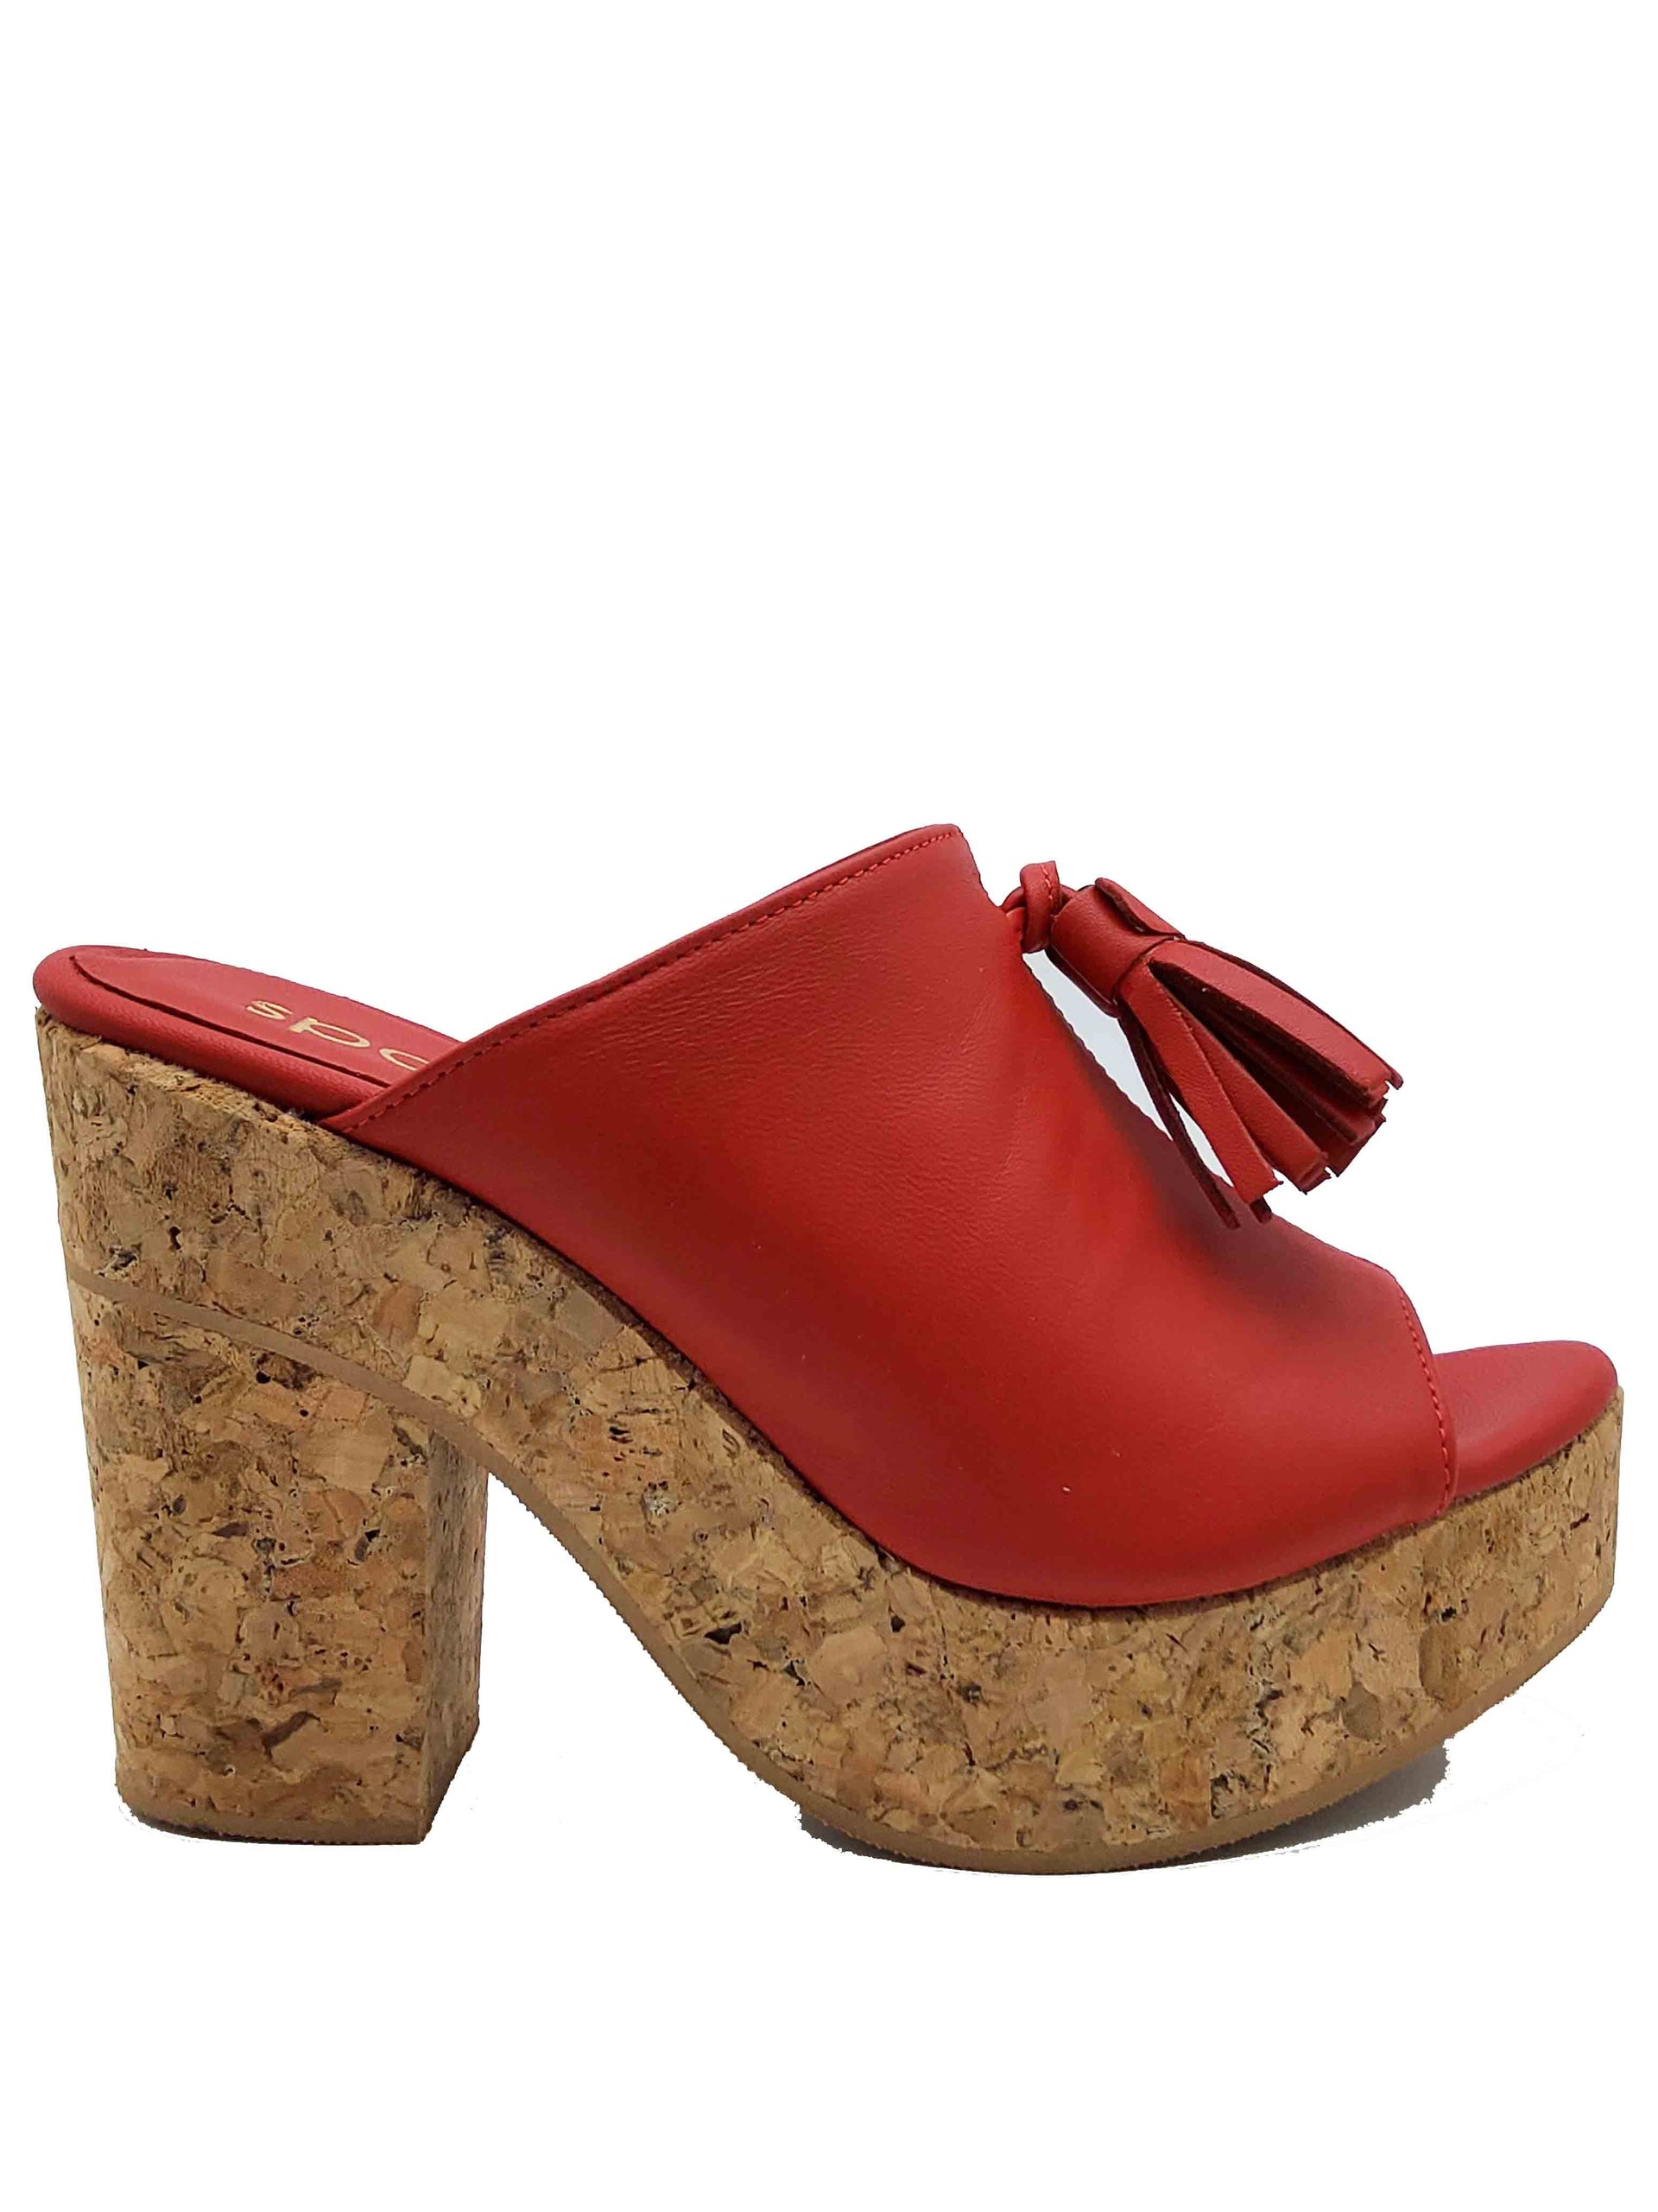 Women's Footwear Red Leather Sandals with Bows and High Cork Wedge